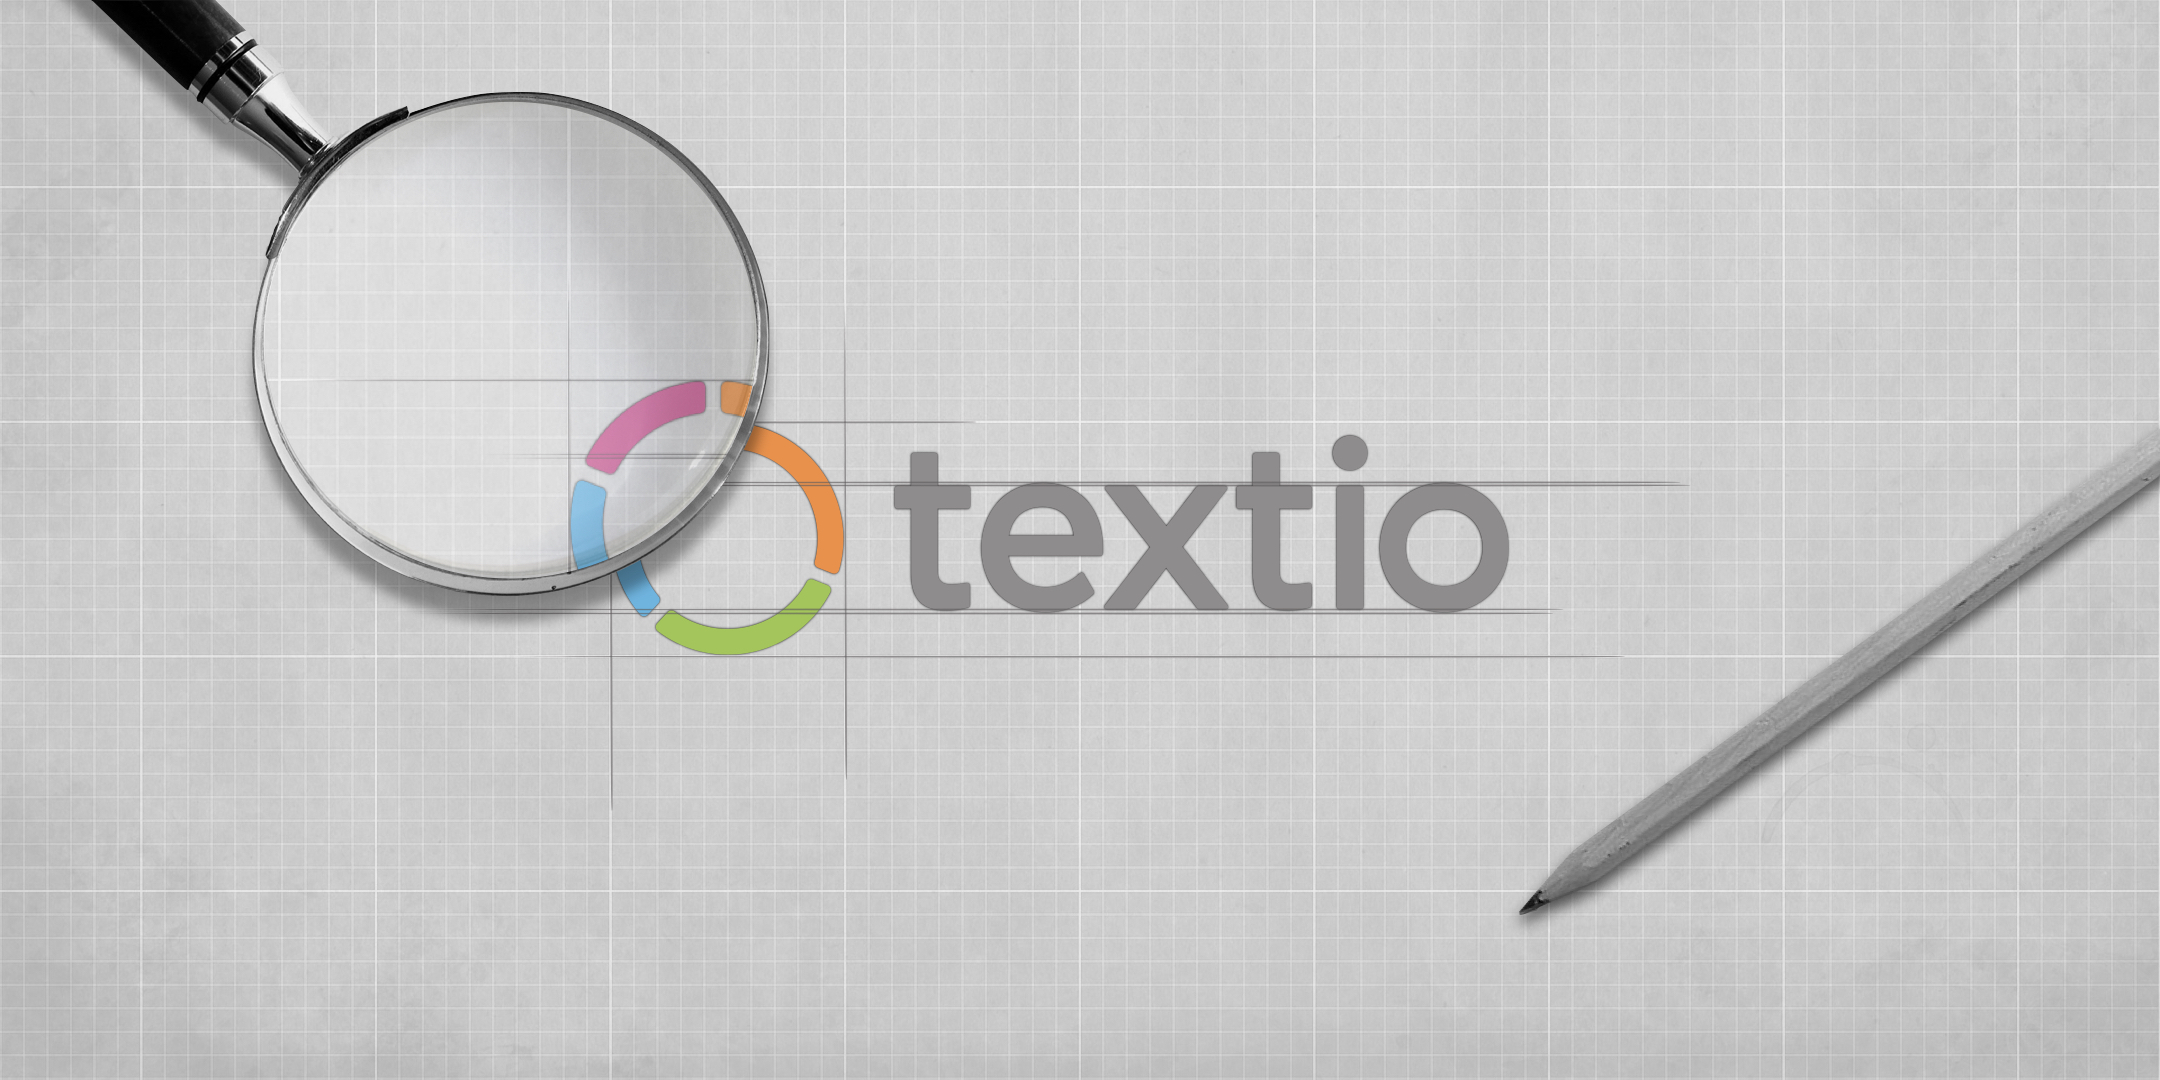 Textio logo on a sketchpad with a magnifying glass and pen visible